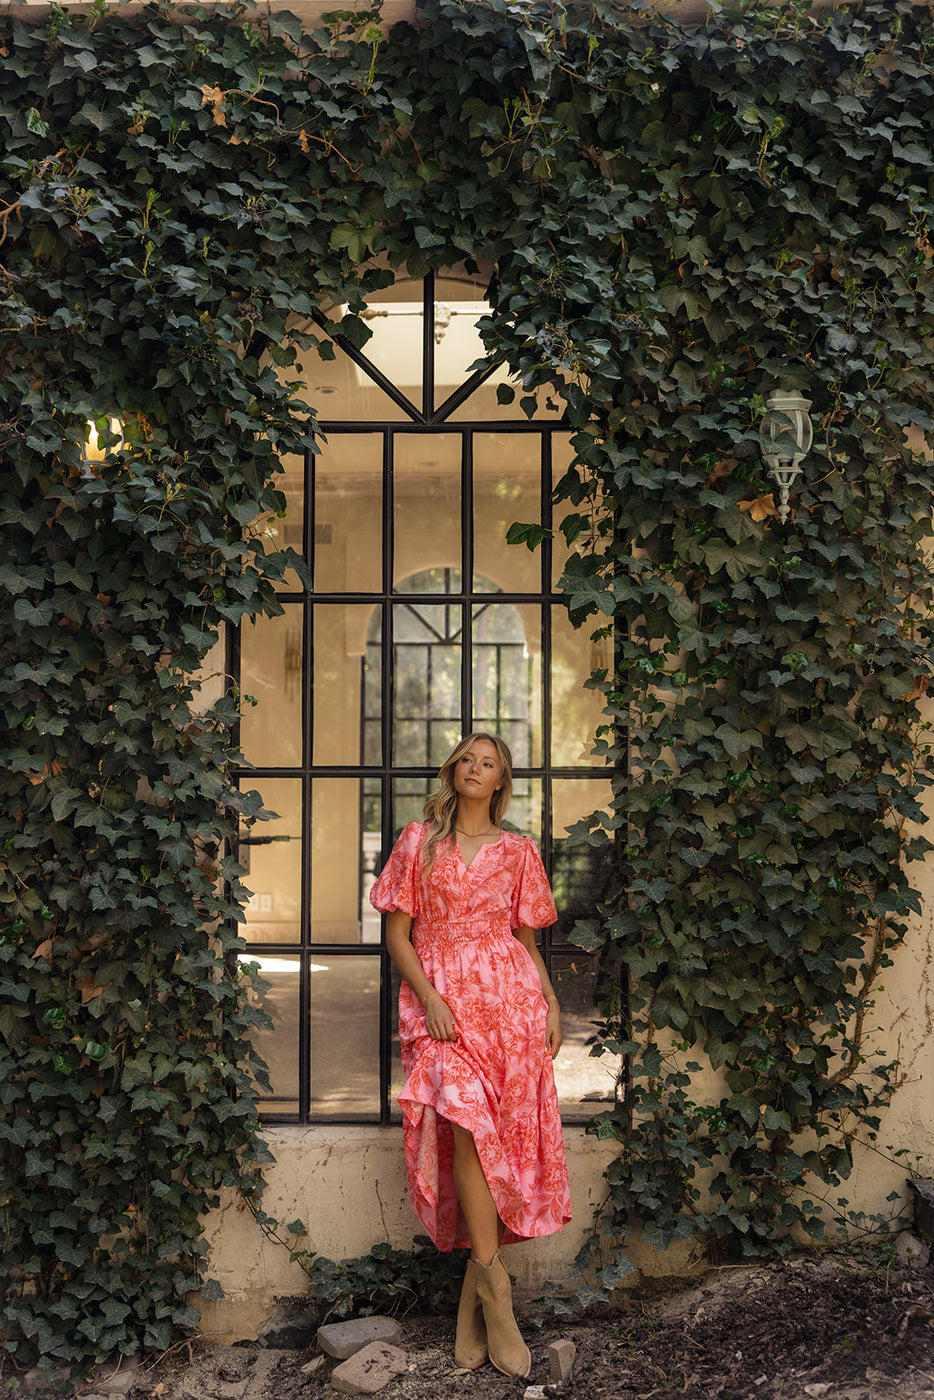 a woman in a pink dress standing in front of a window